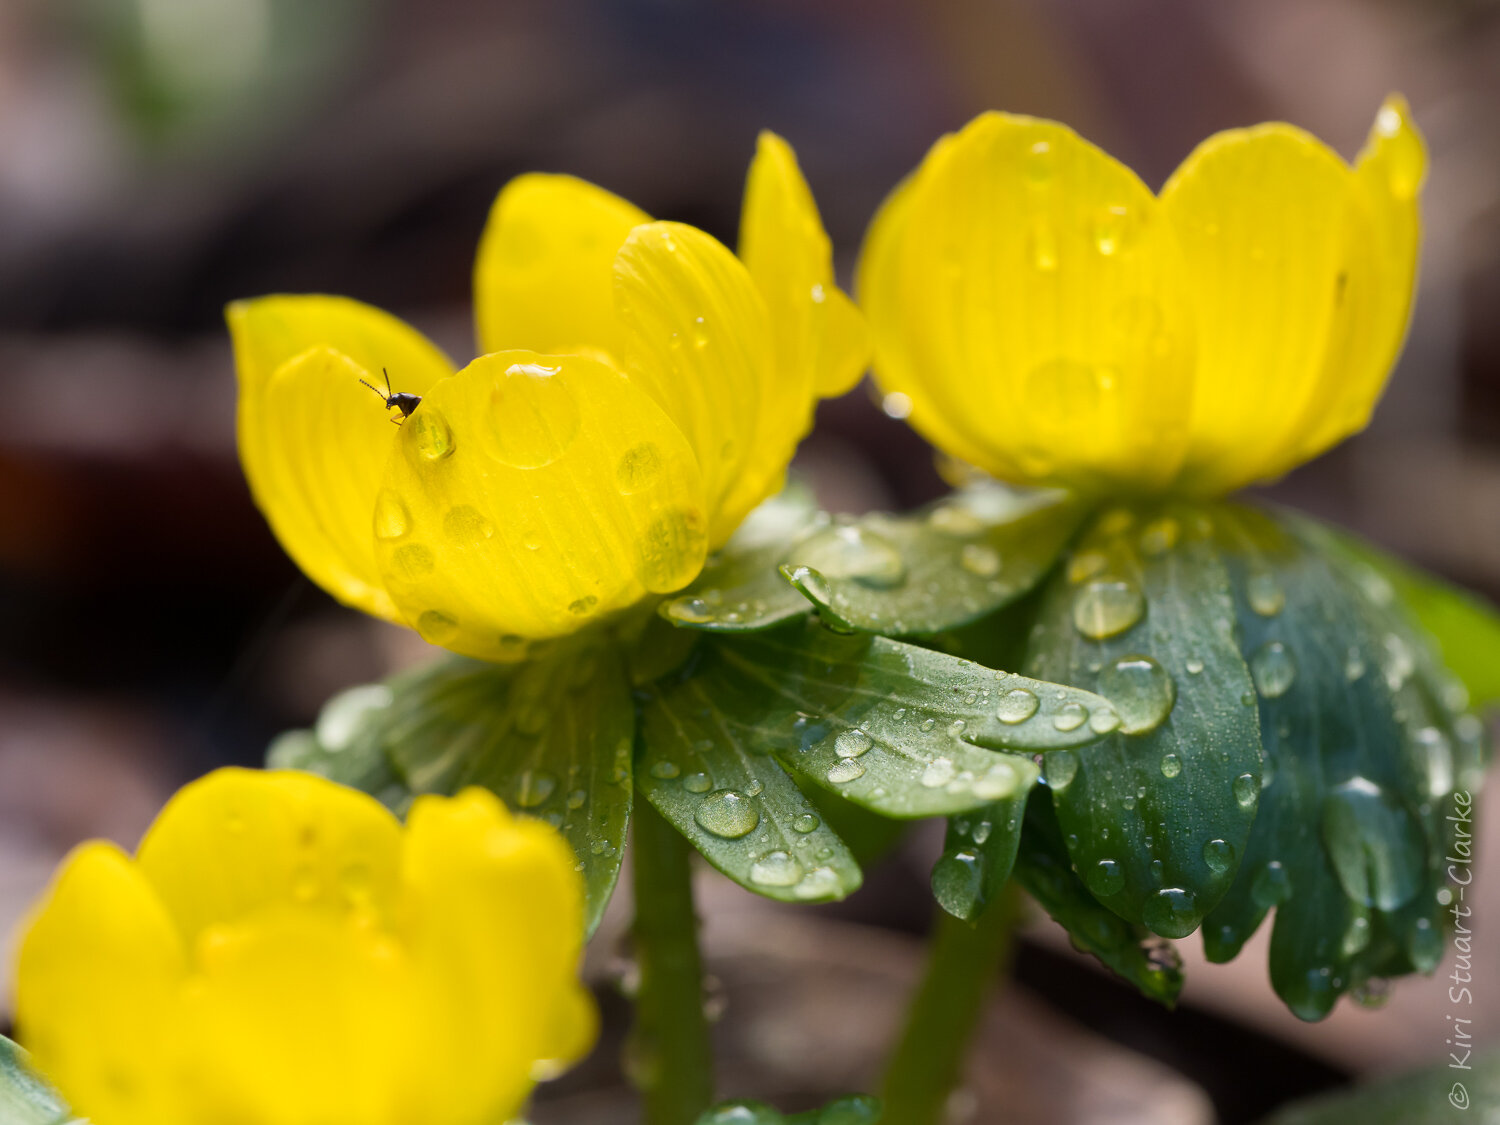  Winter Aconite close up with bug peeping out 